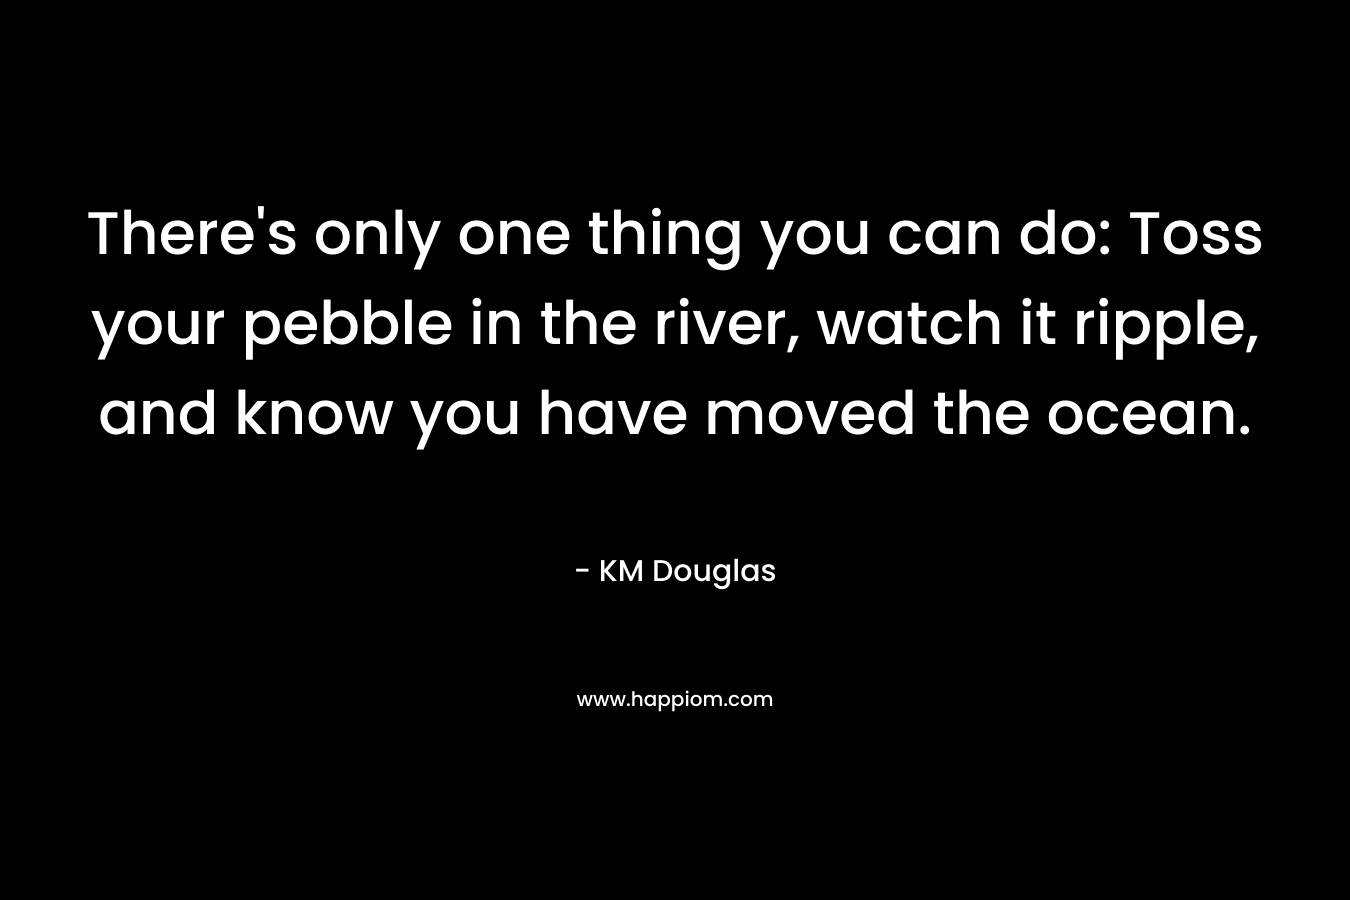 There’s only one thing you can do: Toss your pebble in the river, watch it ripple, and know you have moved the ocean. – KM Douglas